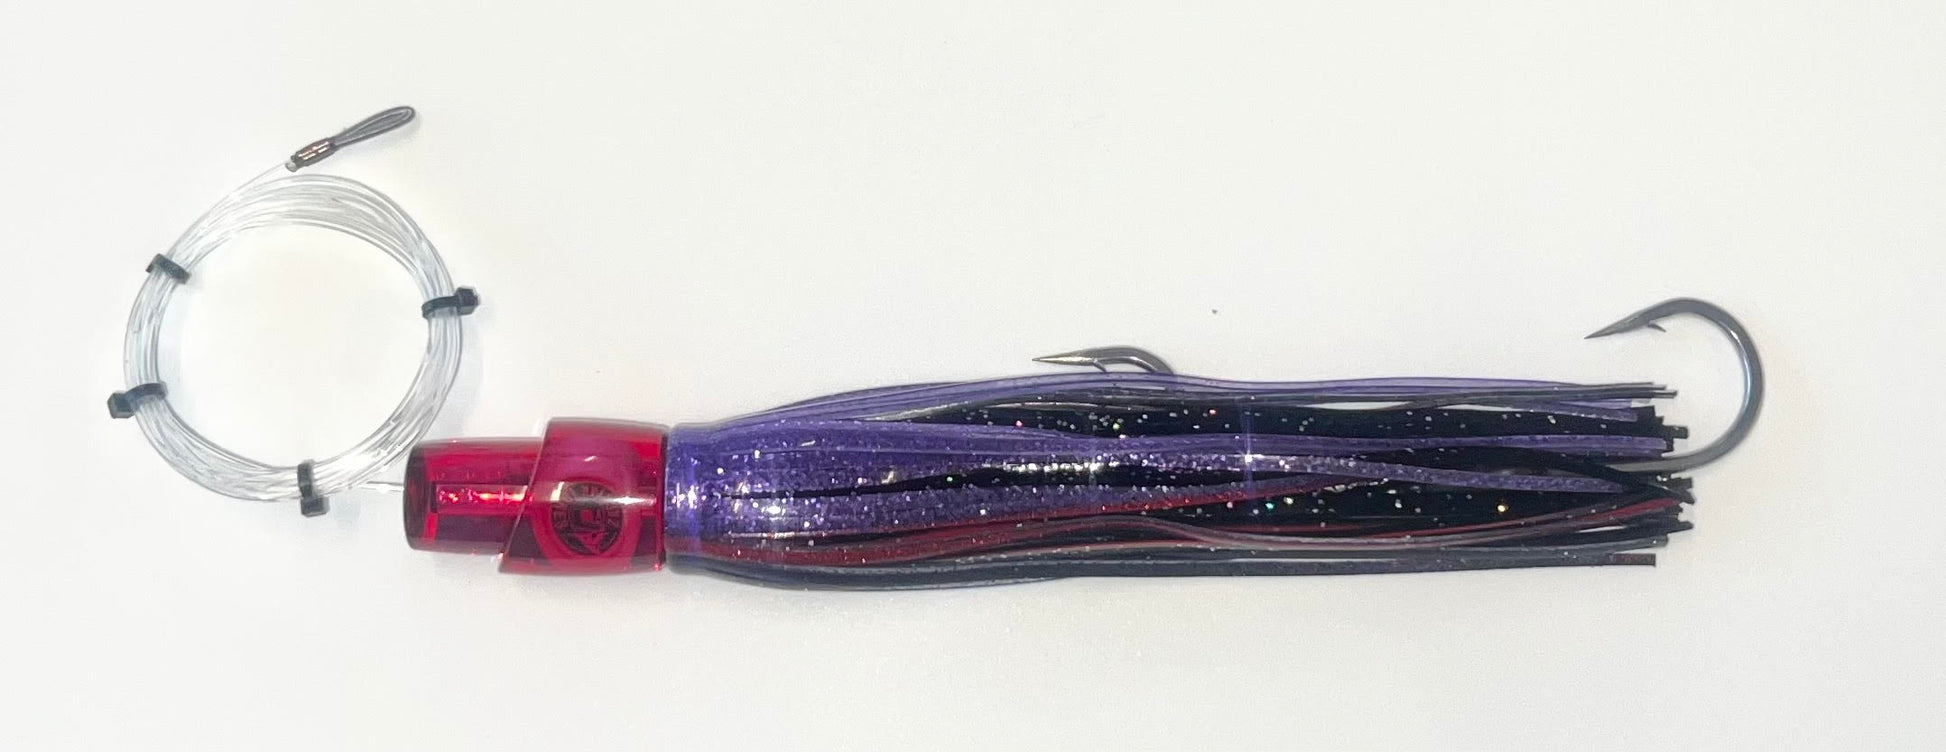 DF Zacatak Thunderstruck Pre-Rigged Trolling Lure - Dogfish Tackle & Marine